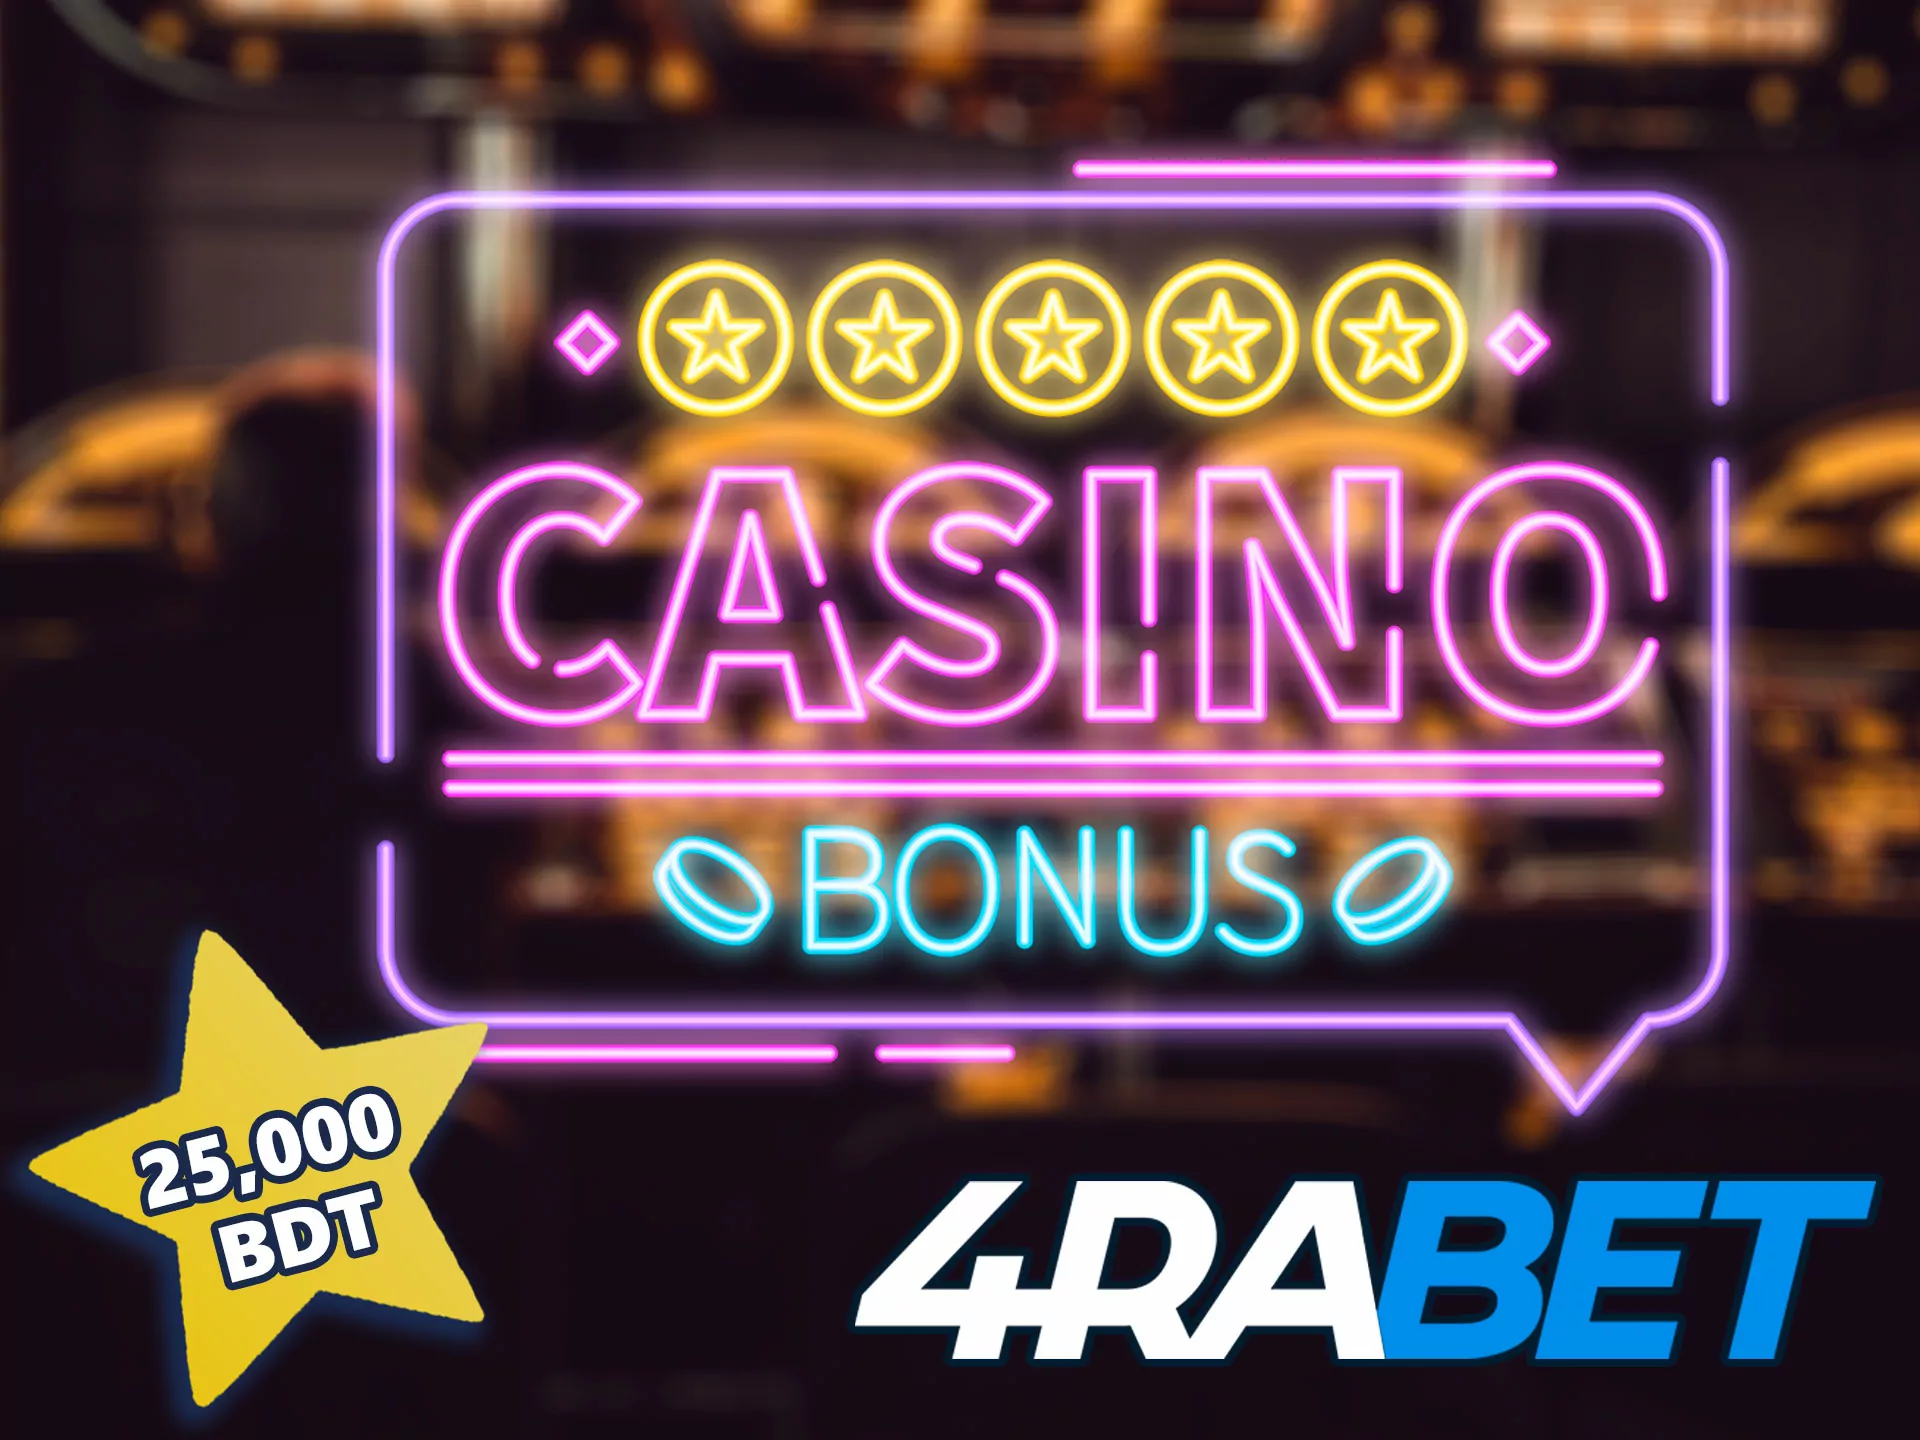 The bookmaker has not only a registration bonus, casino fans will also be able to get a nice gift.